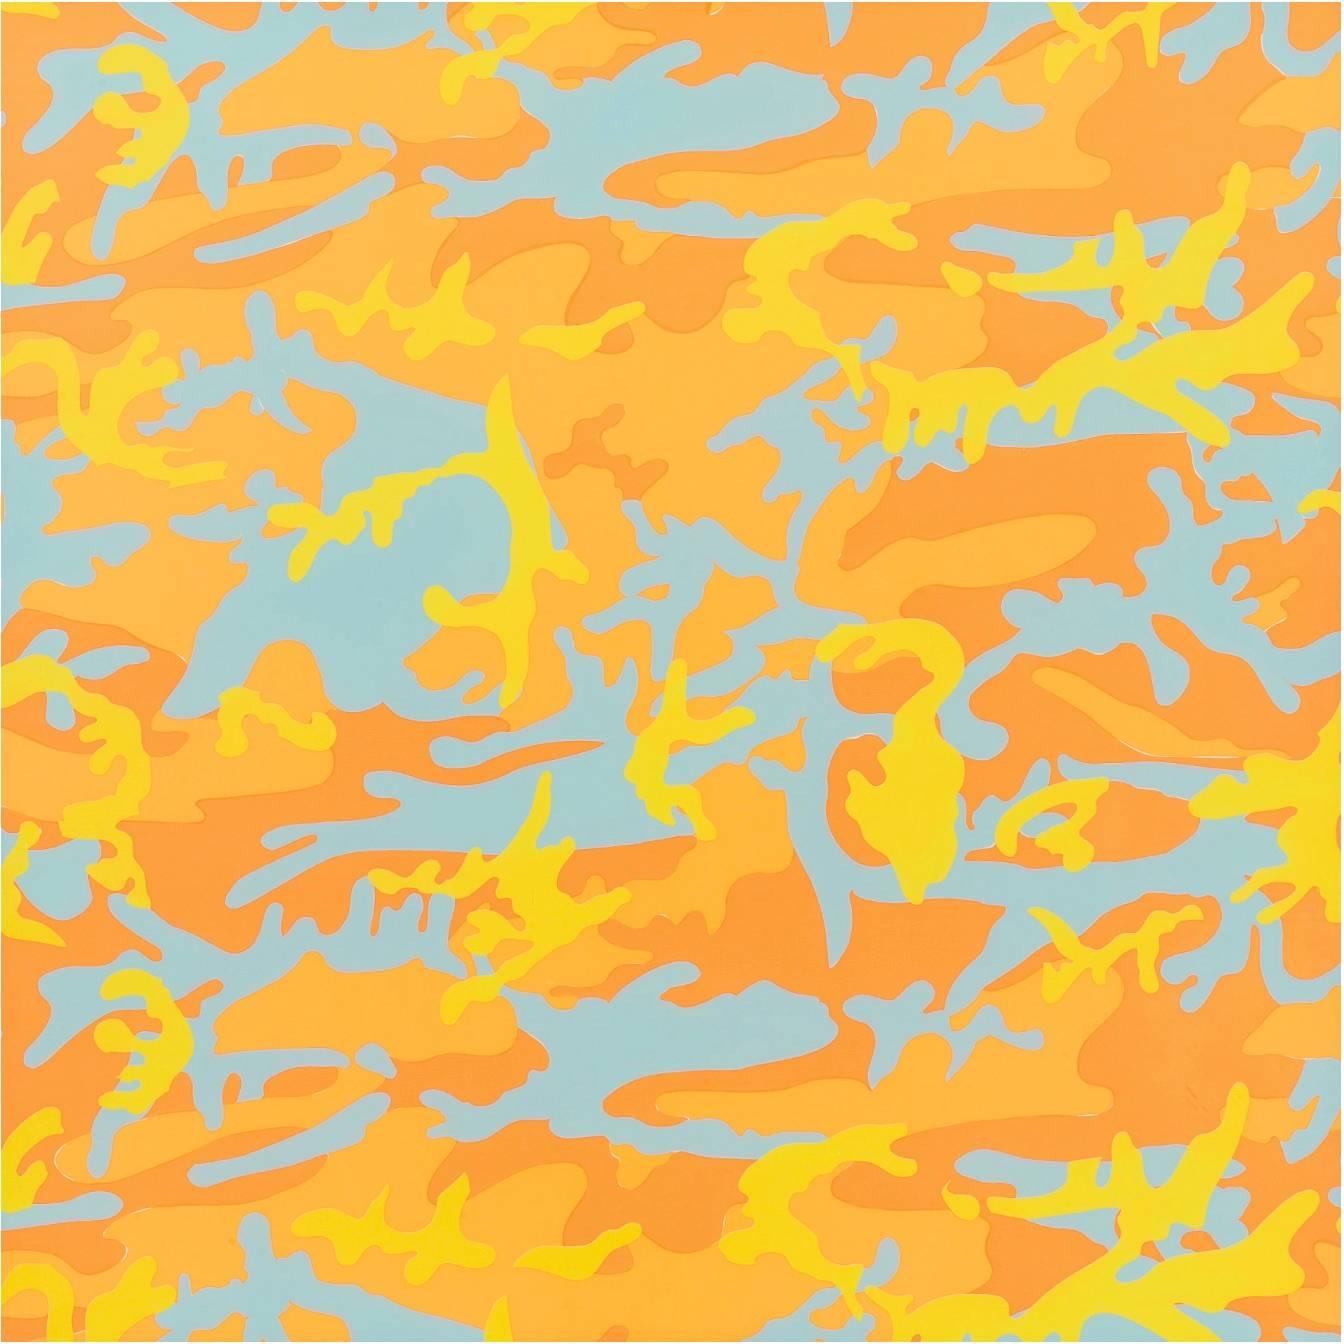 Andy Warhol Abstract Print - Camouflage